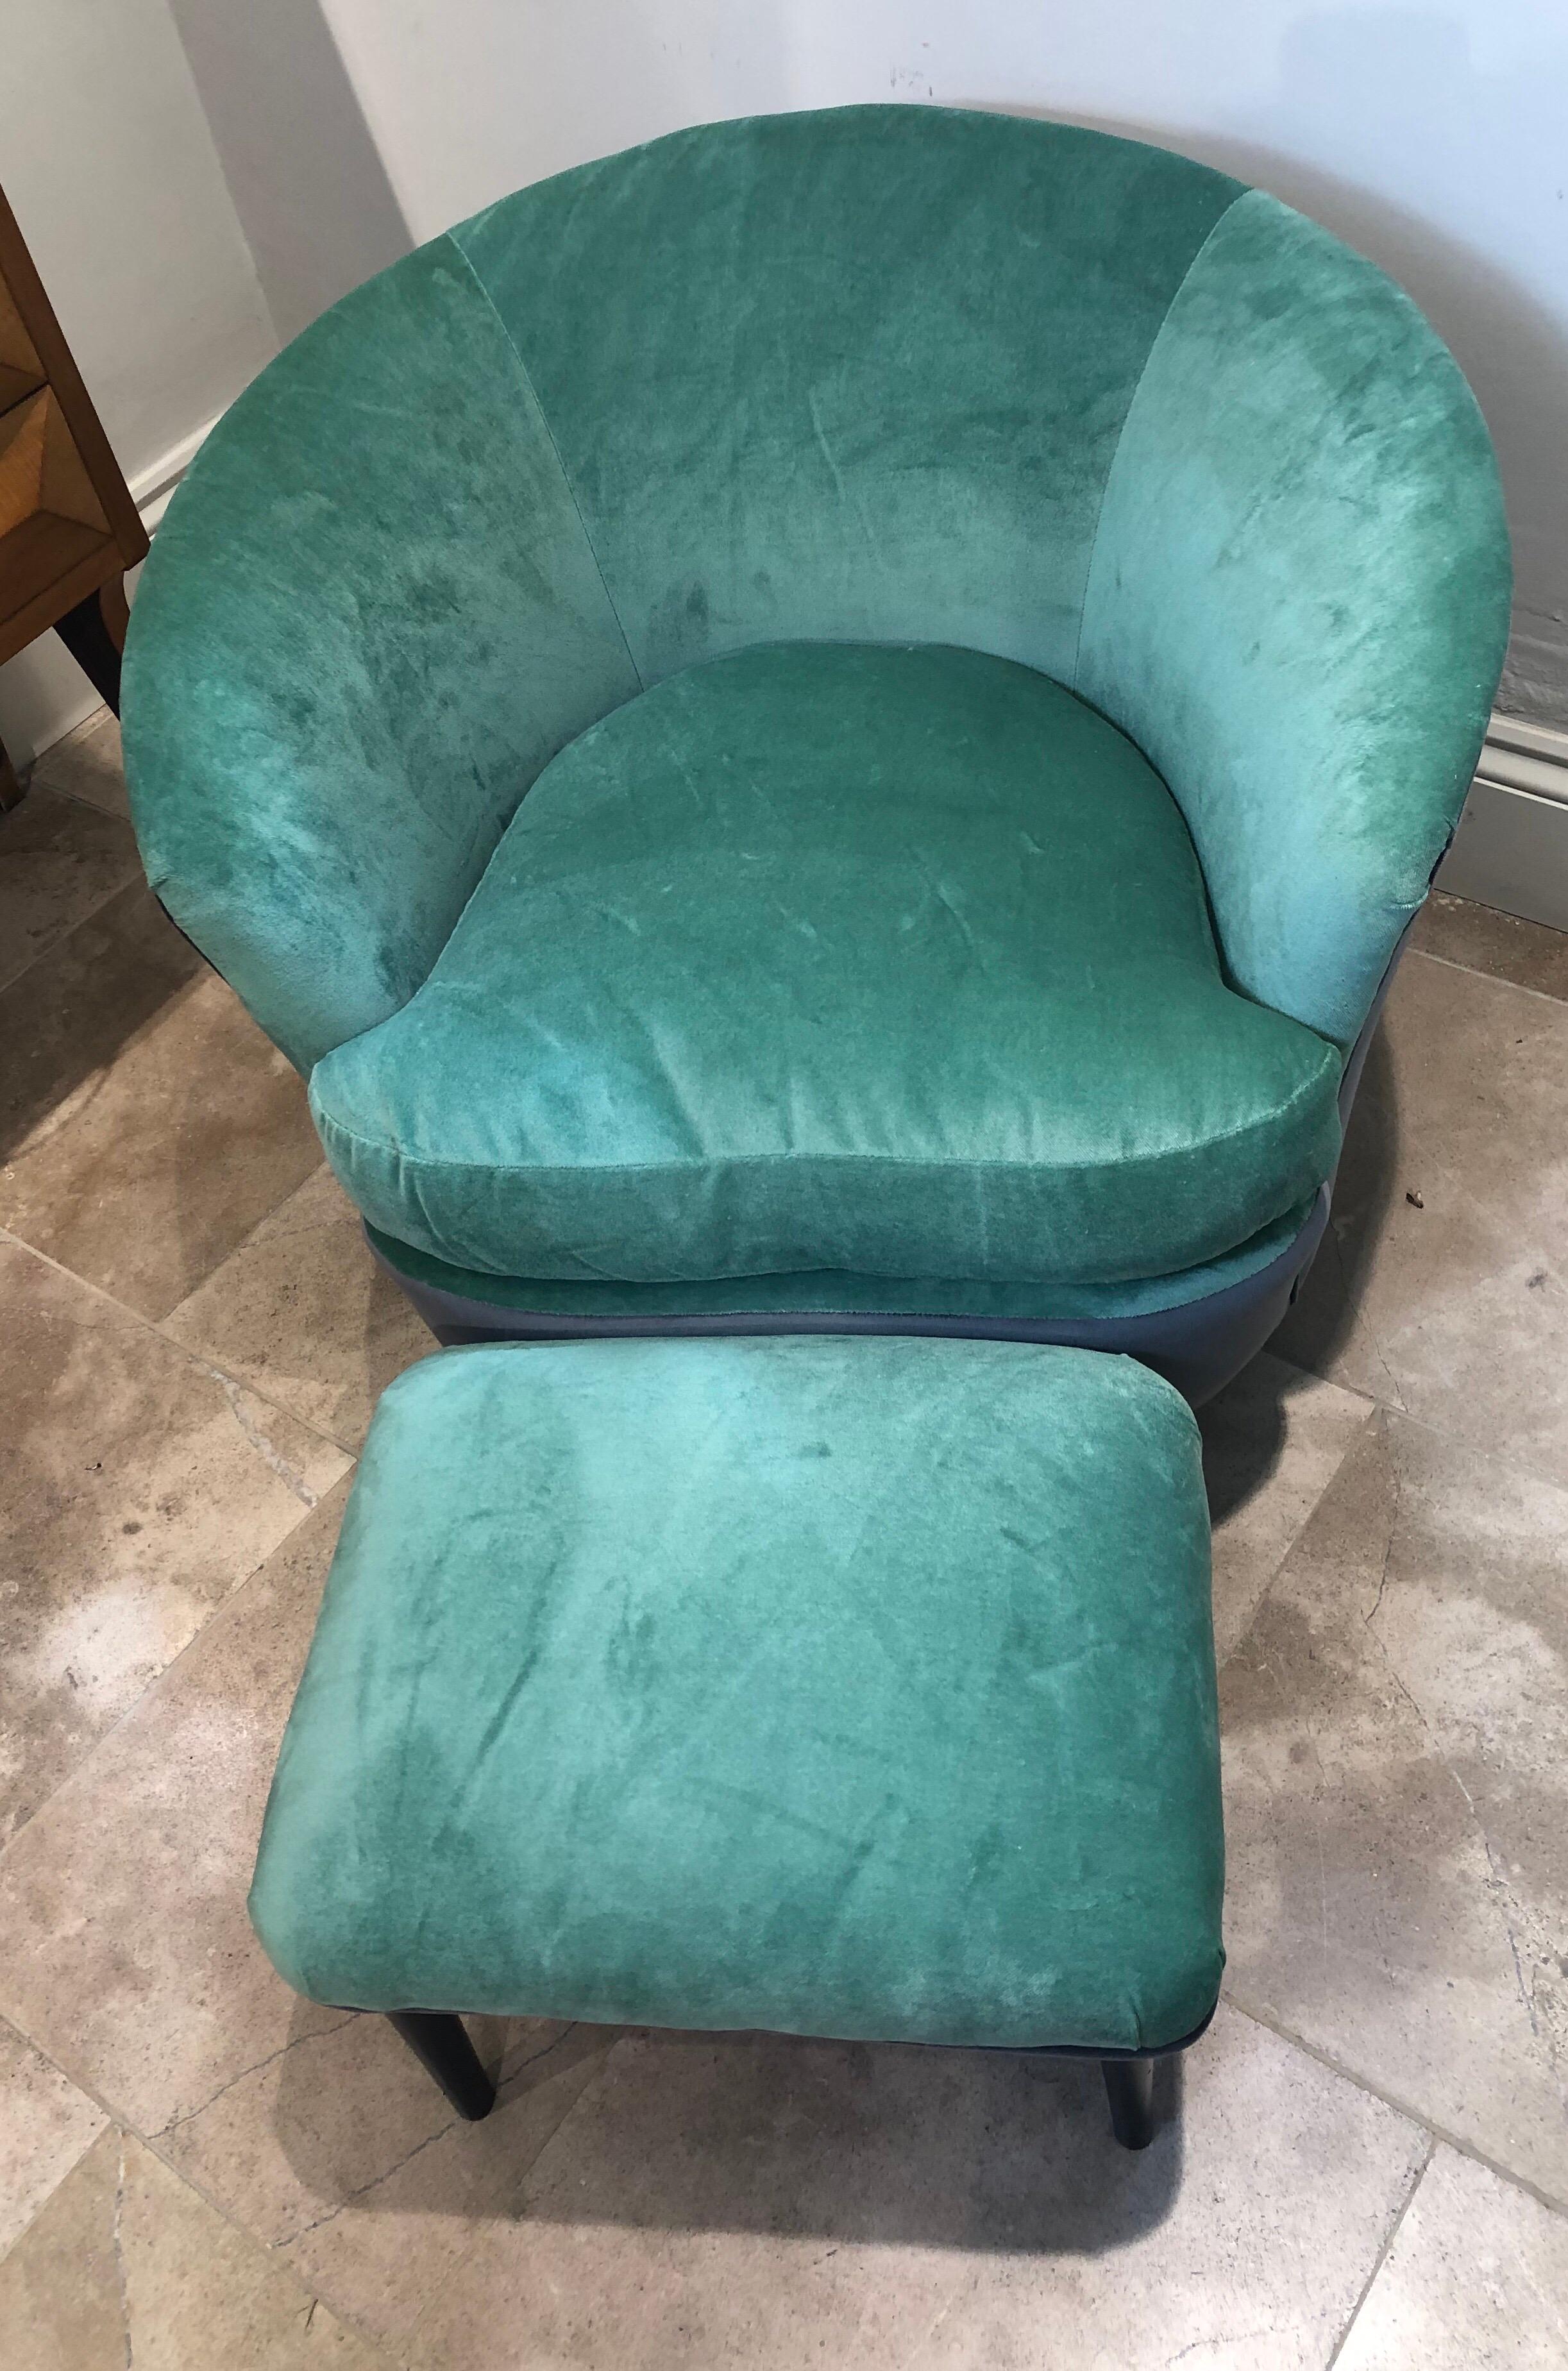 Pair of Italian Curved Chairs and Stools with Mint Green and Grey Upholstery For Sale 1